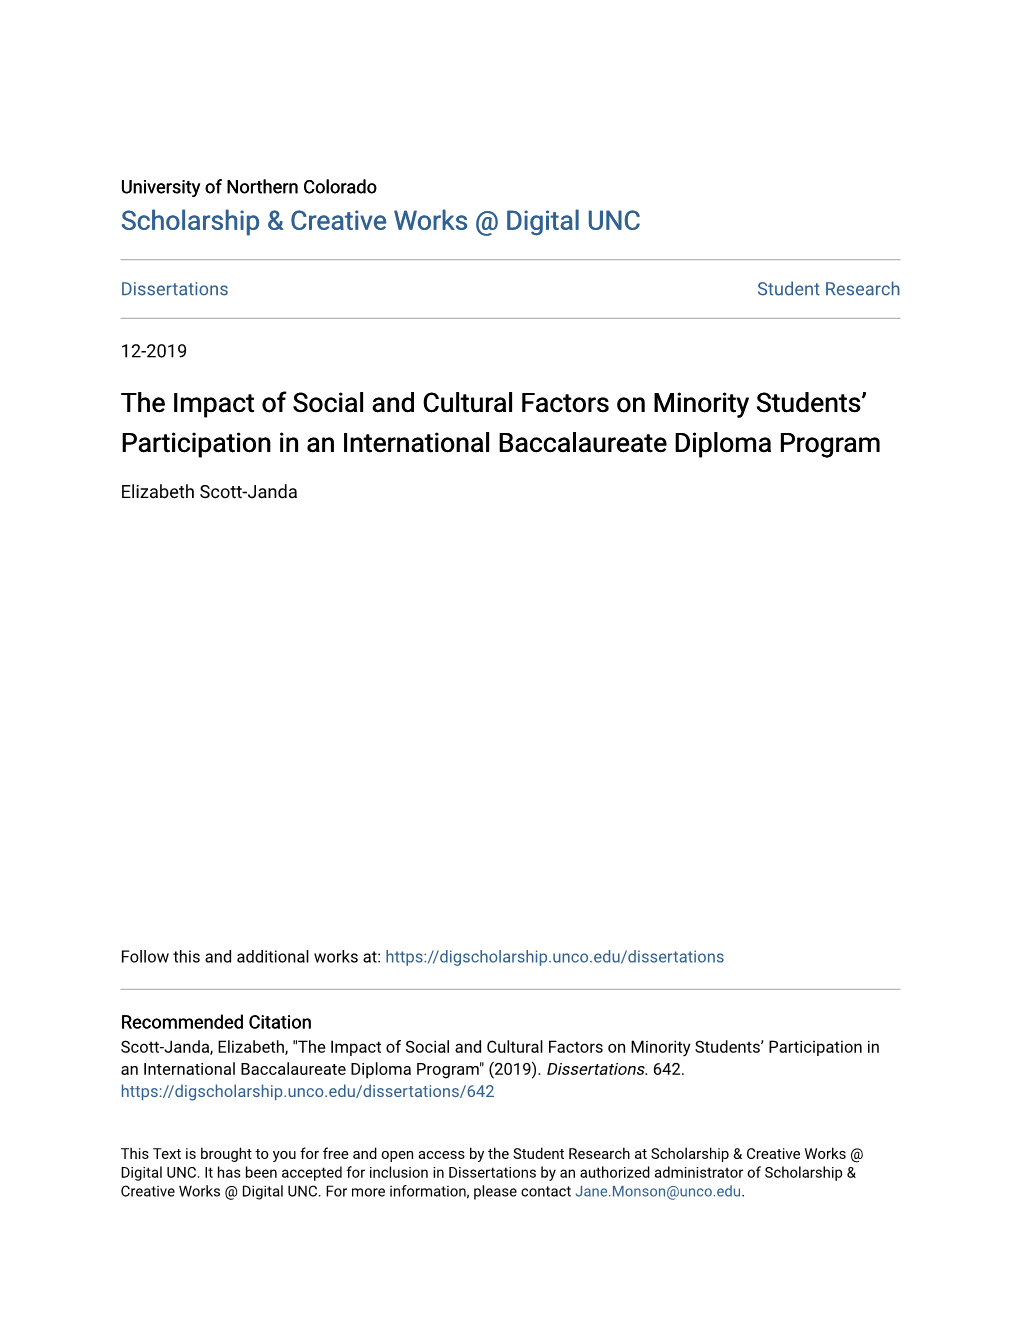 The Impact of Social and Cultural Factors on Minority Students’ Participation in an International Baccalaureate Diploma Program